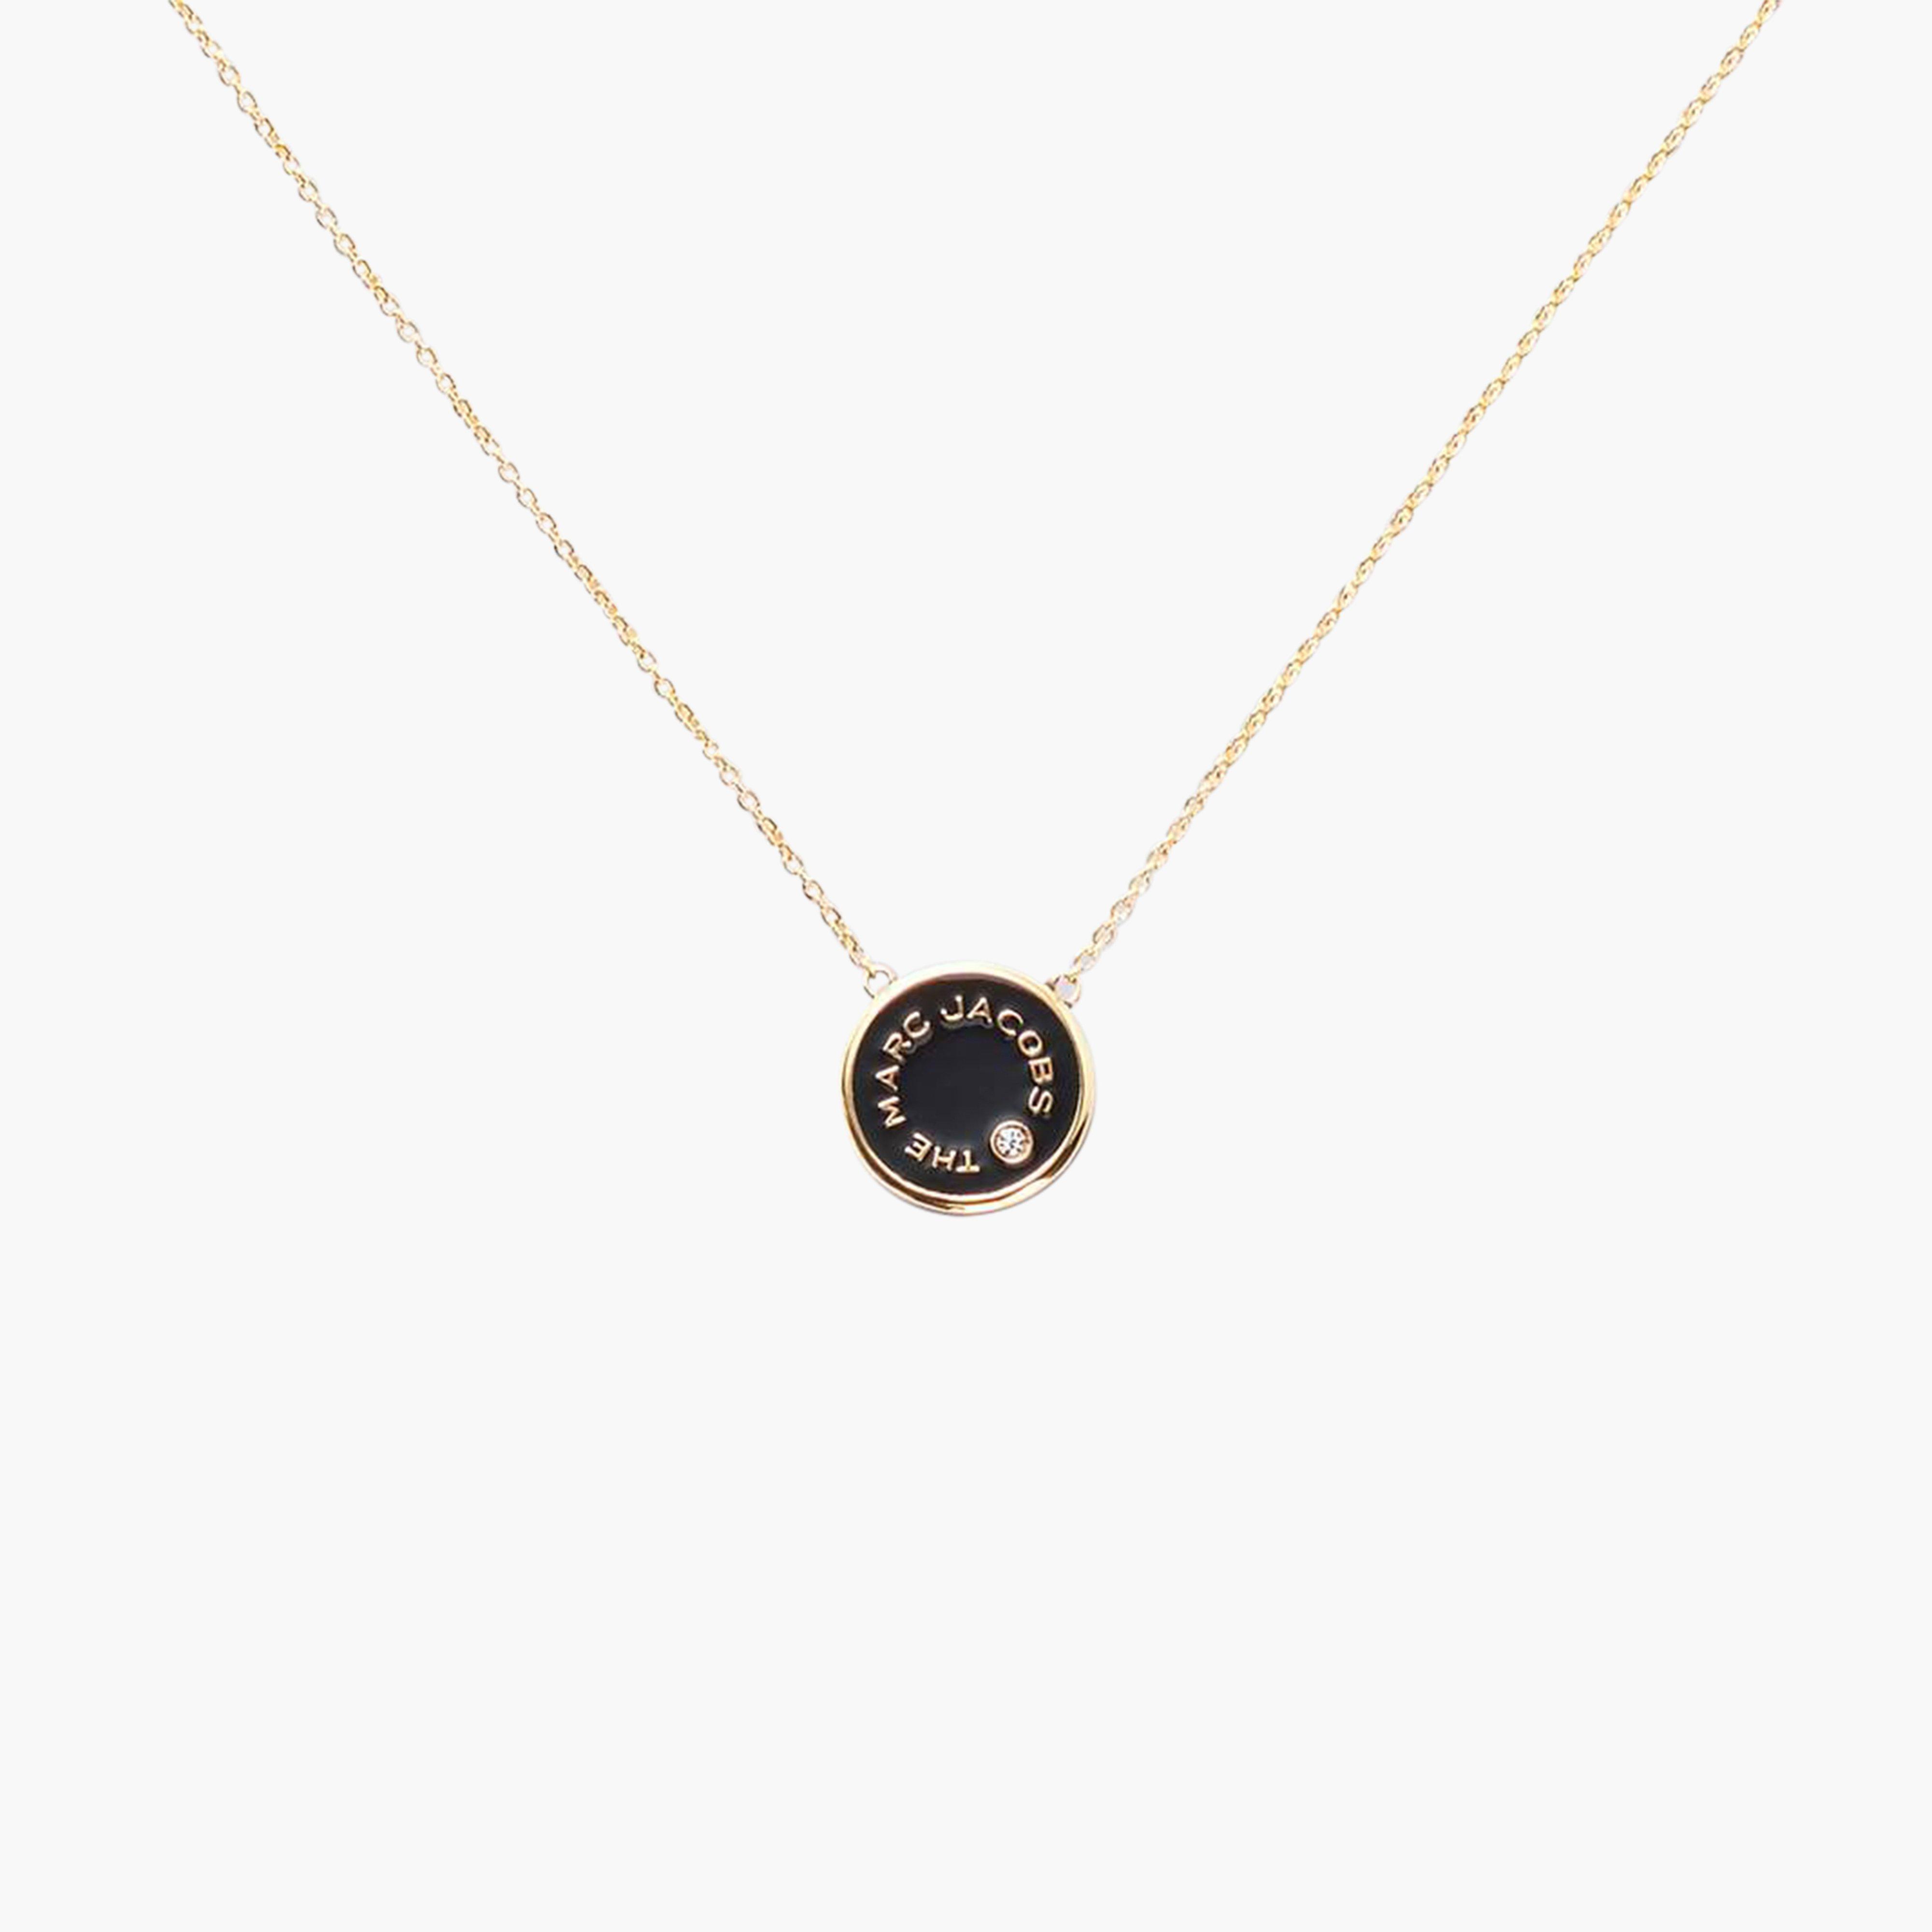 Marc by Marc jacobs The Medallion Pendant,BLACK/GOLD